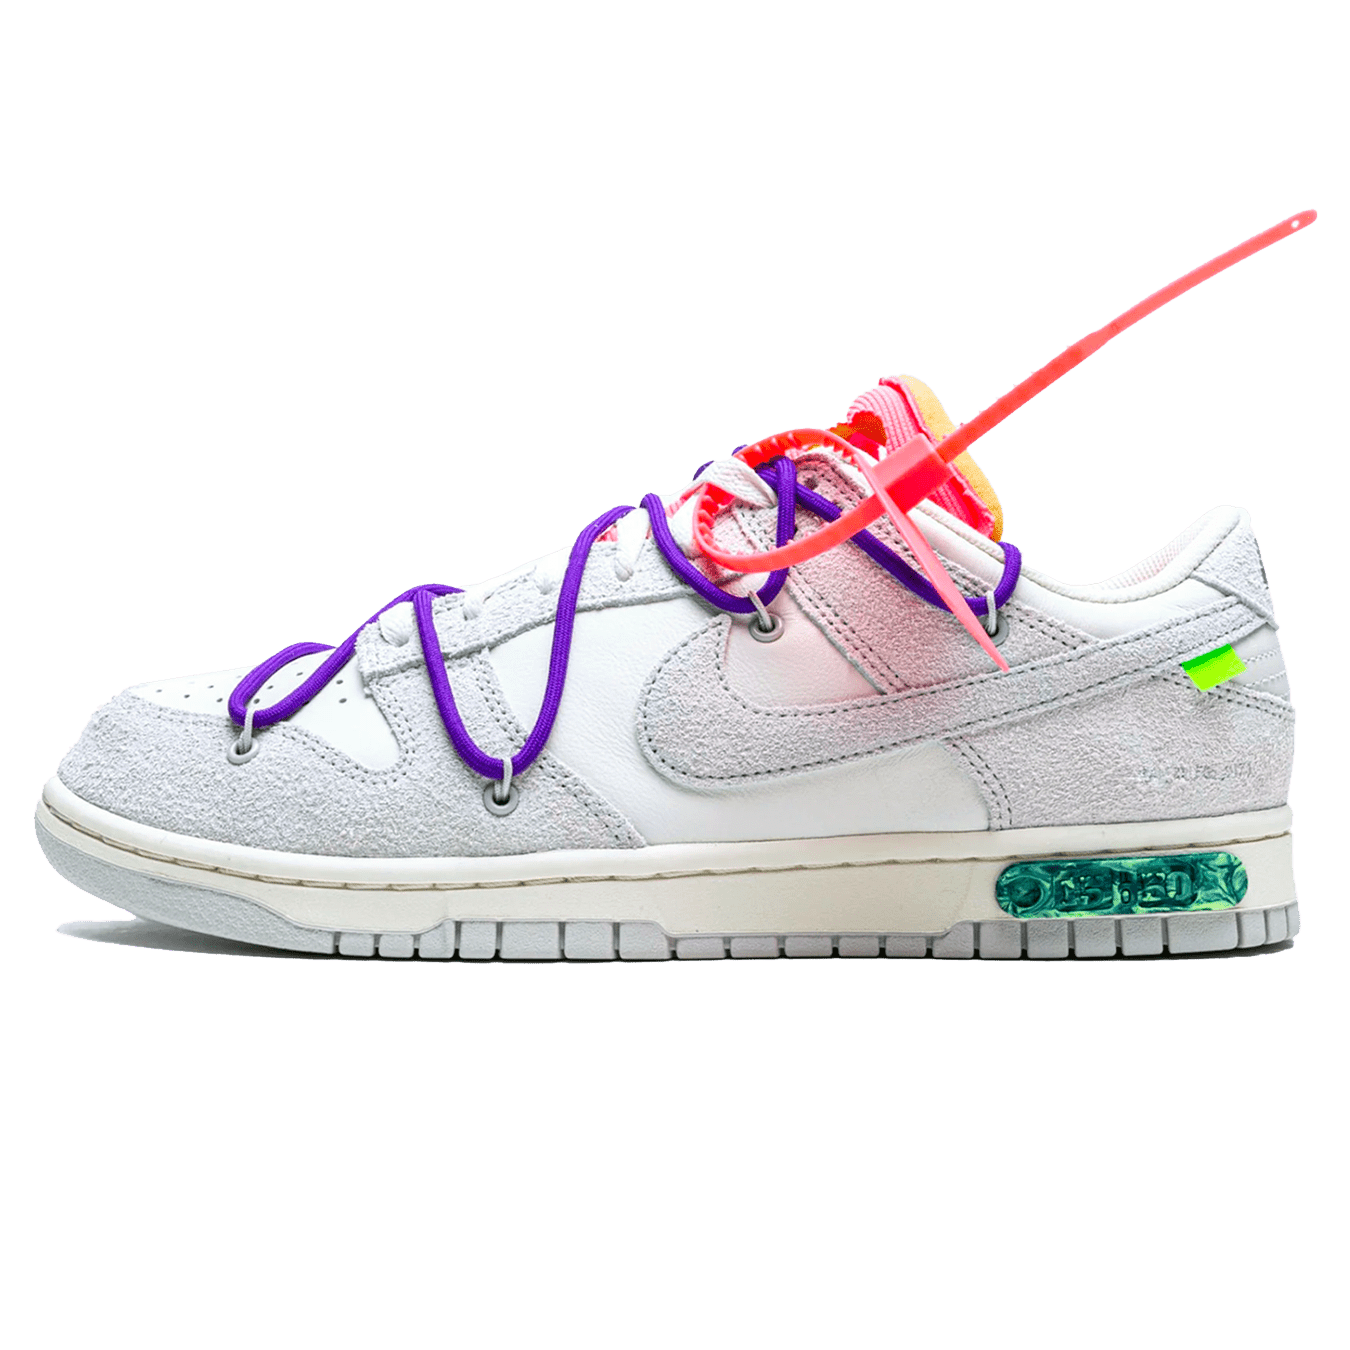 NIKE DUNK LOW X OFF WHITE LOT 15 Of 50 Size DJ0950 101 BRAND NEW 2021 ...